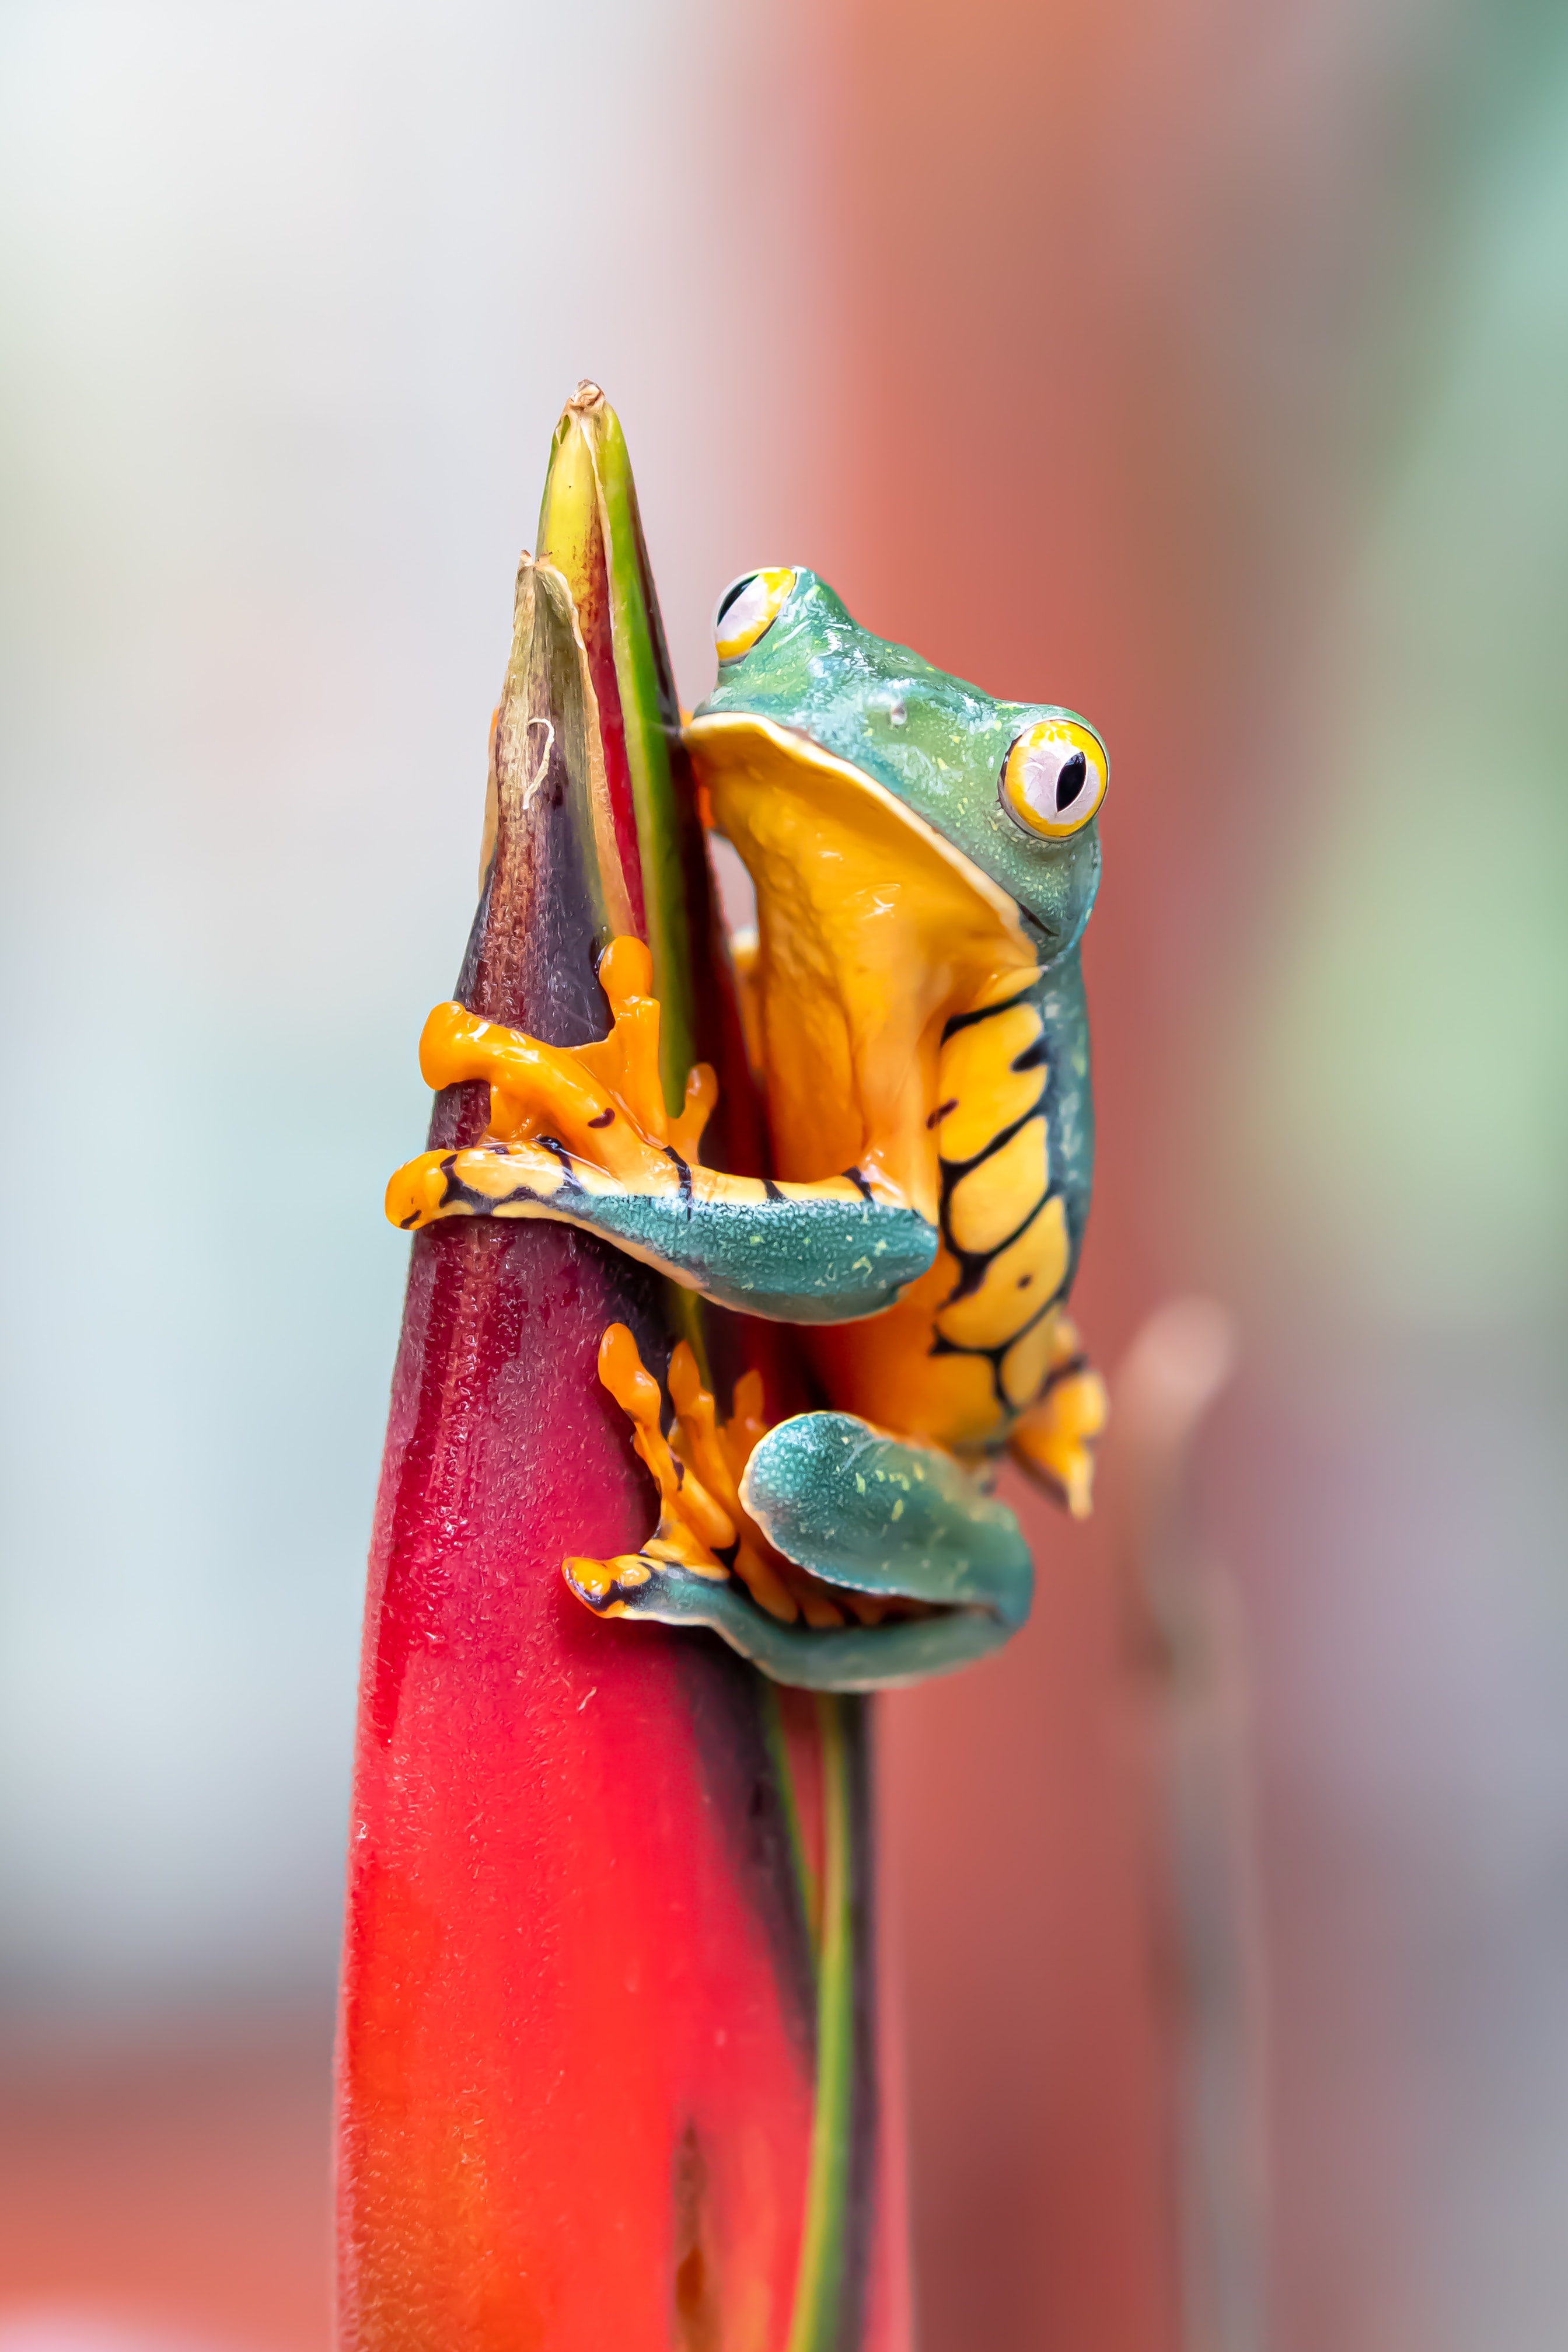 A tree frog is clinging to the conical bud of a colourful plant.